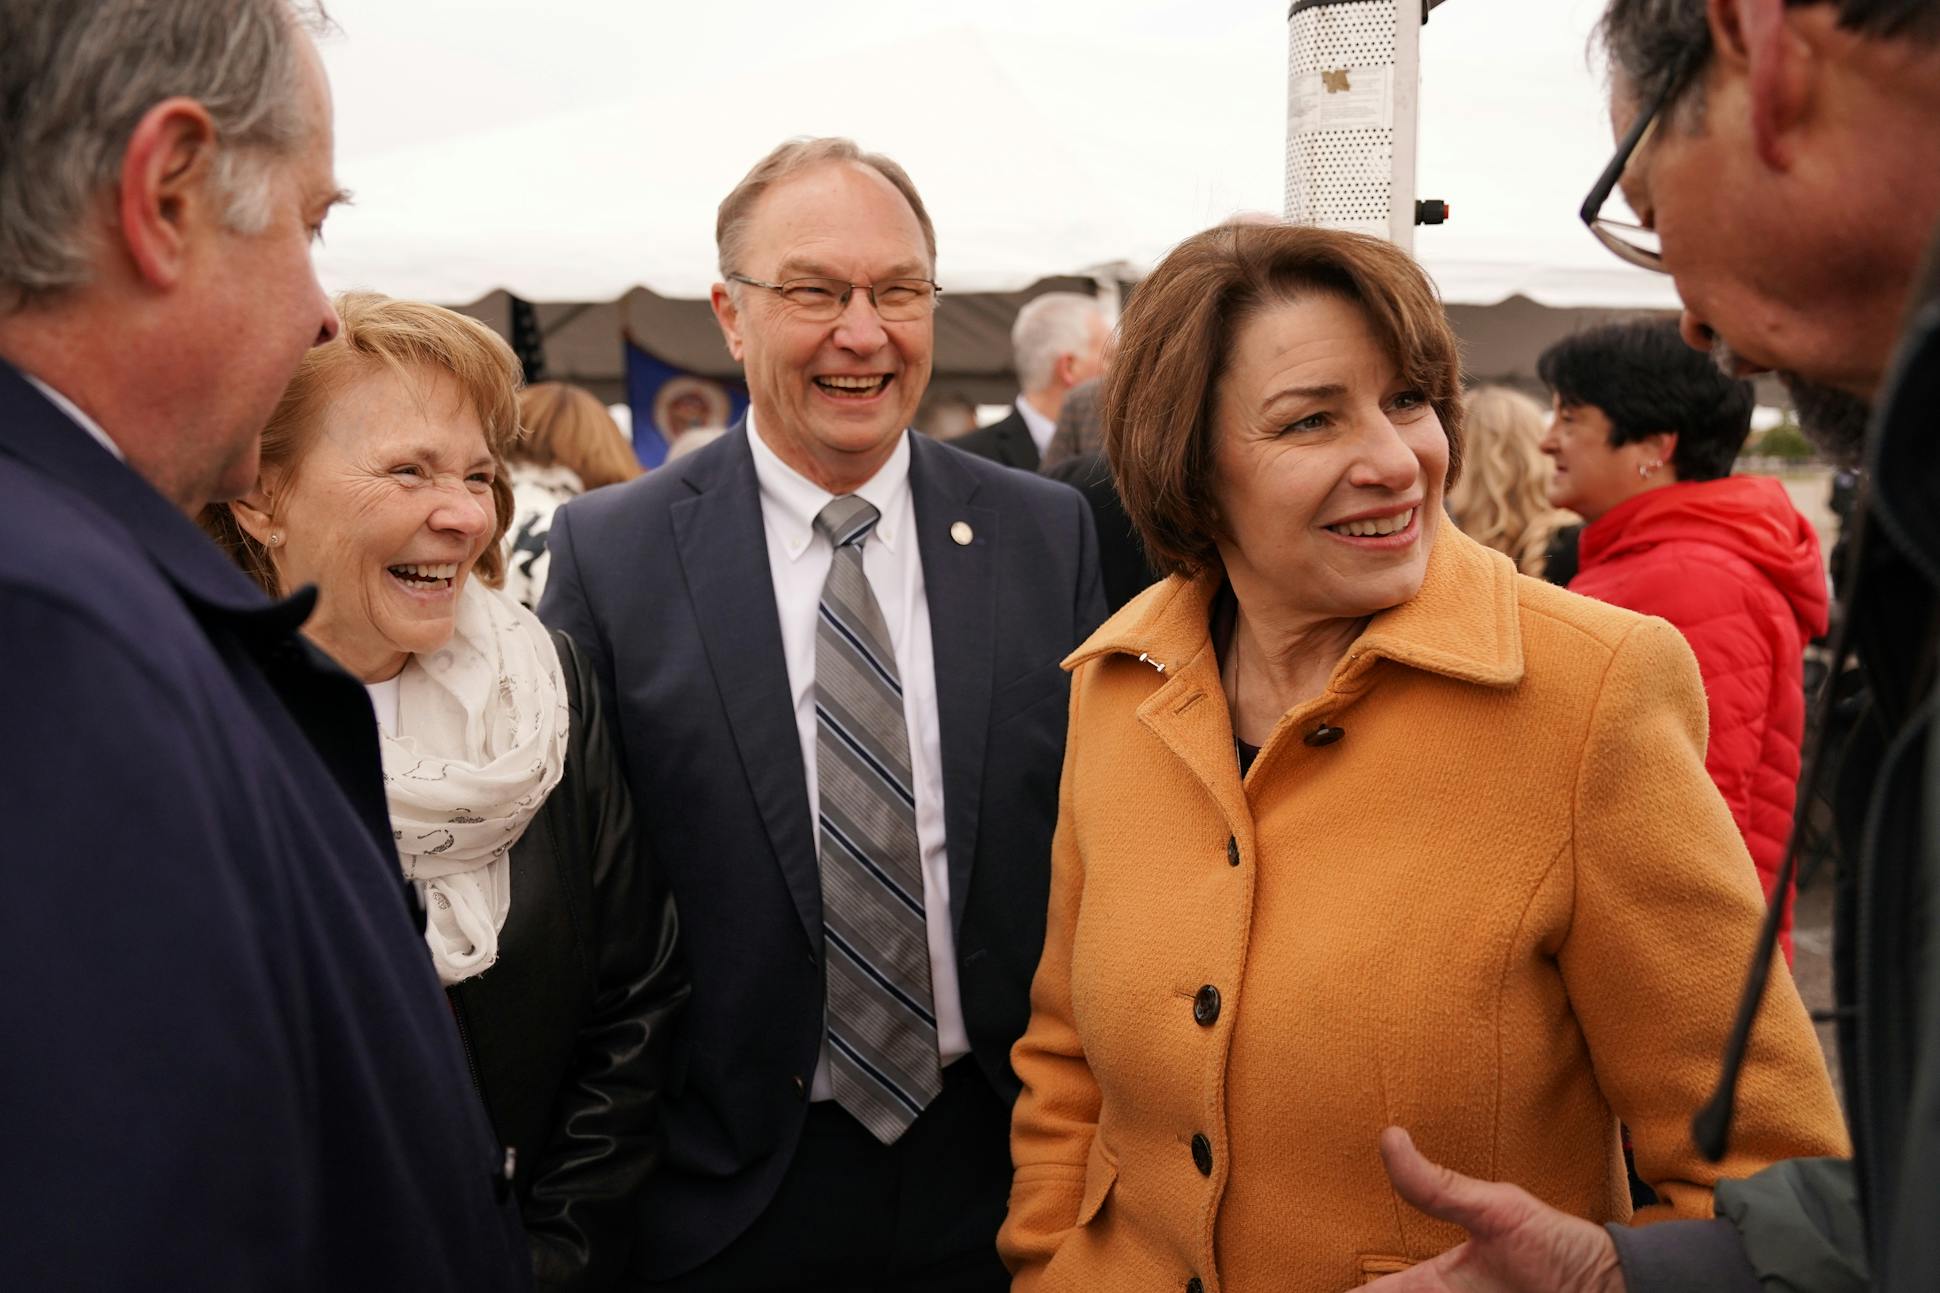 Klobuchar was greeted by supporter Bill Biros, right, as she chatting with other elected officials following the I-94 West Corridor Coalition Groundbreaking Event in Albertville.